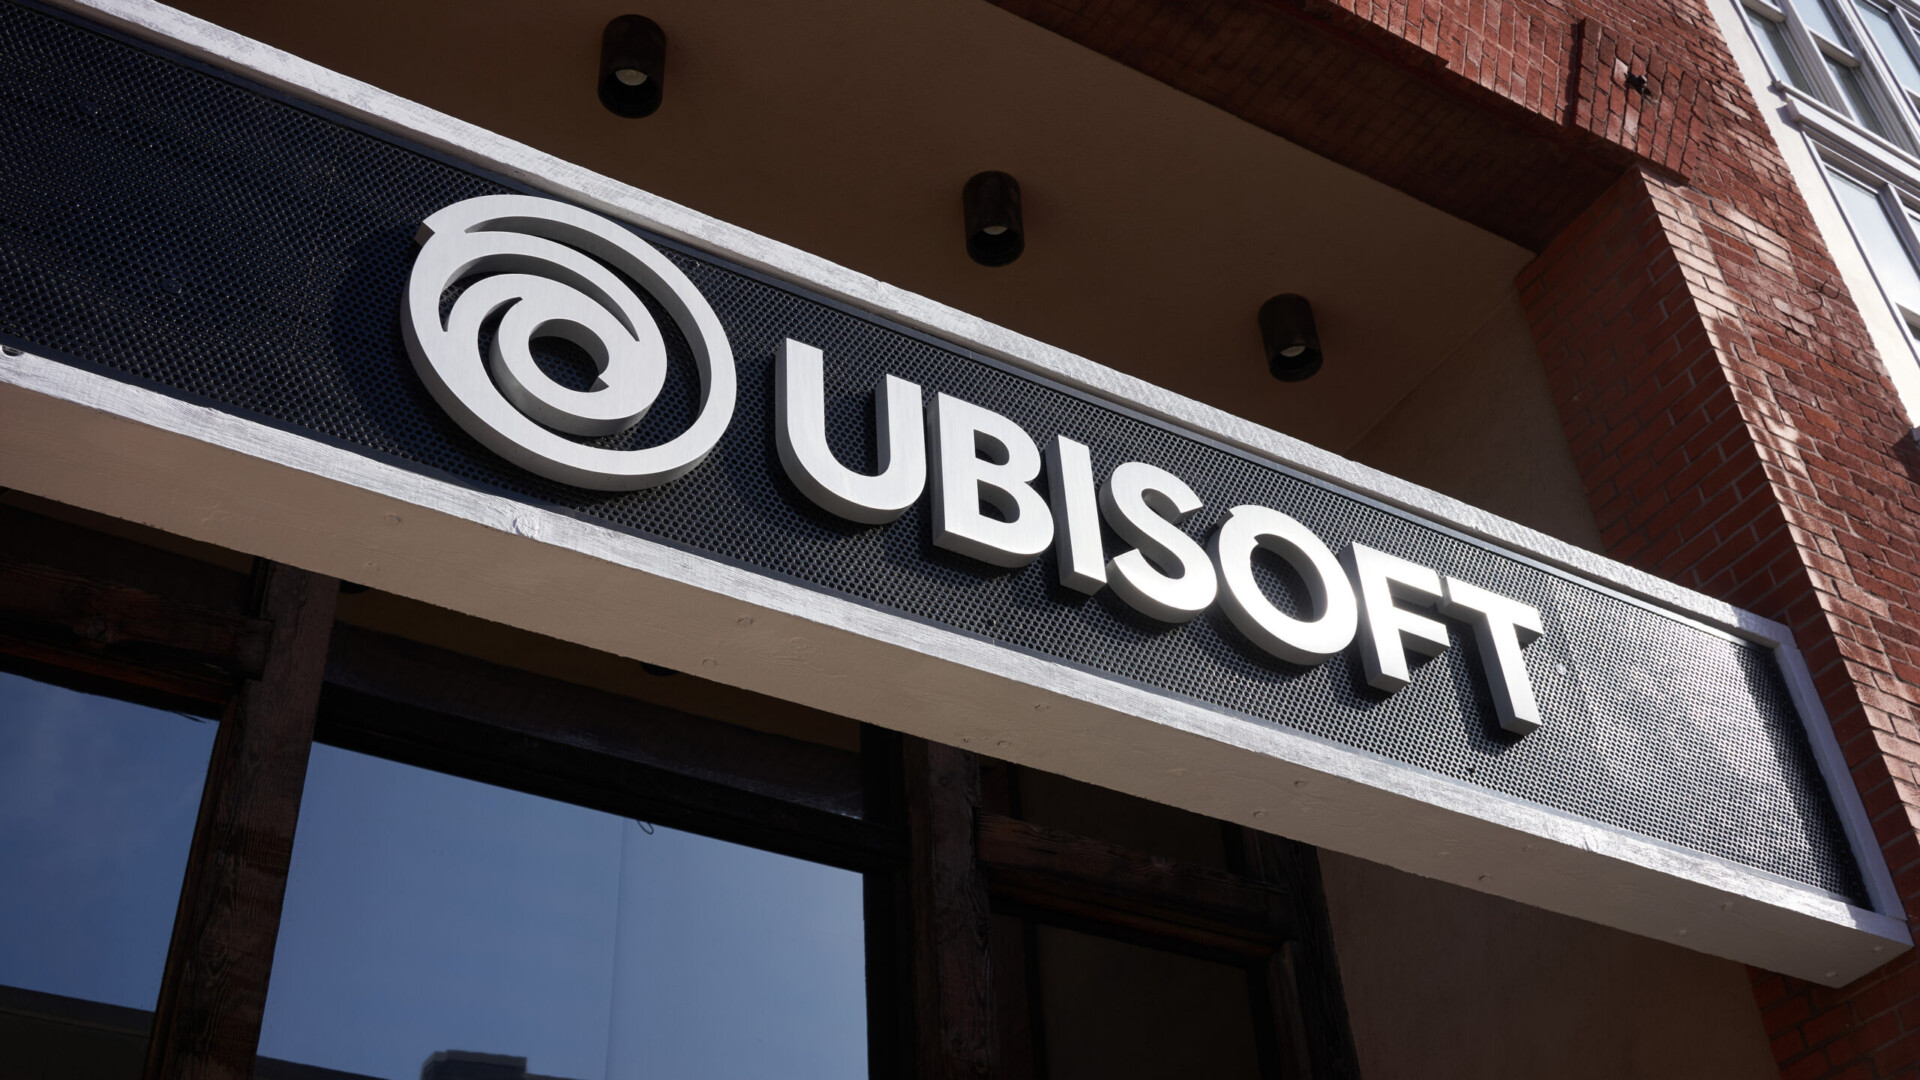 Ubisoft Toronto Lays Off 33 Employees Amidst Industry Challenges